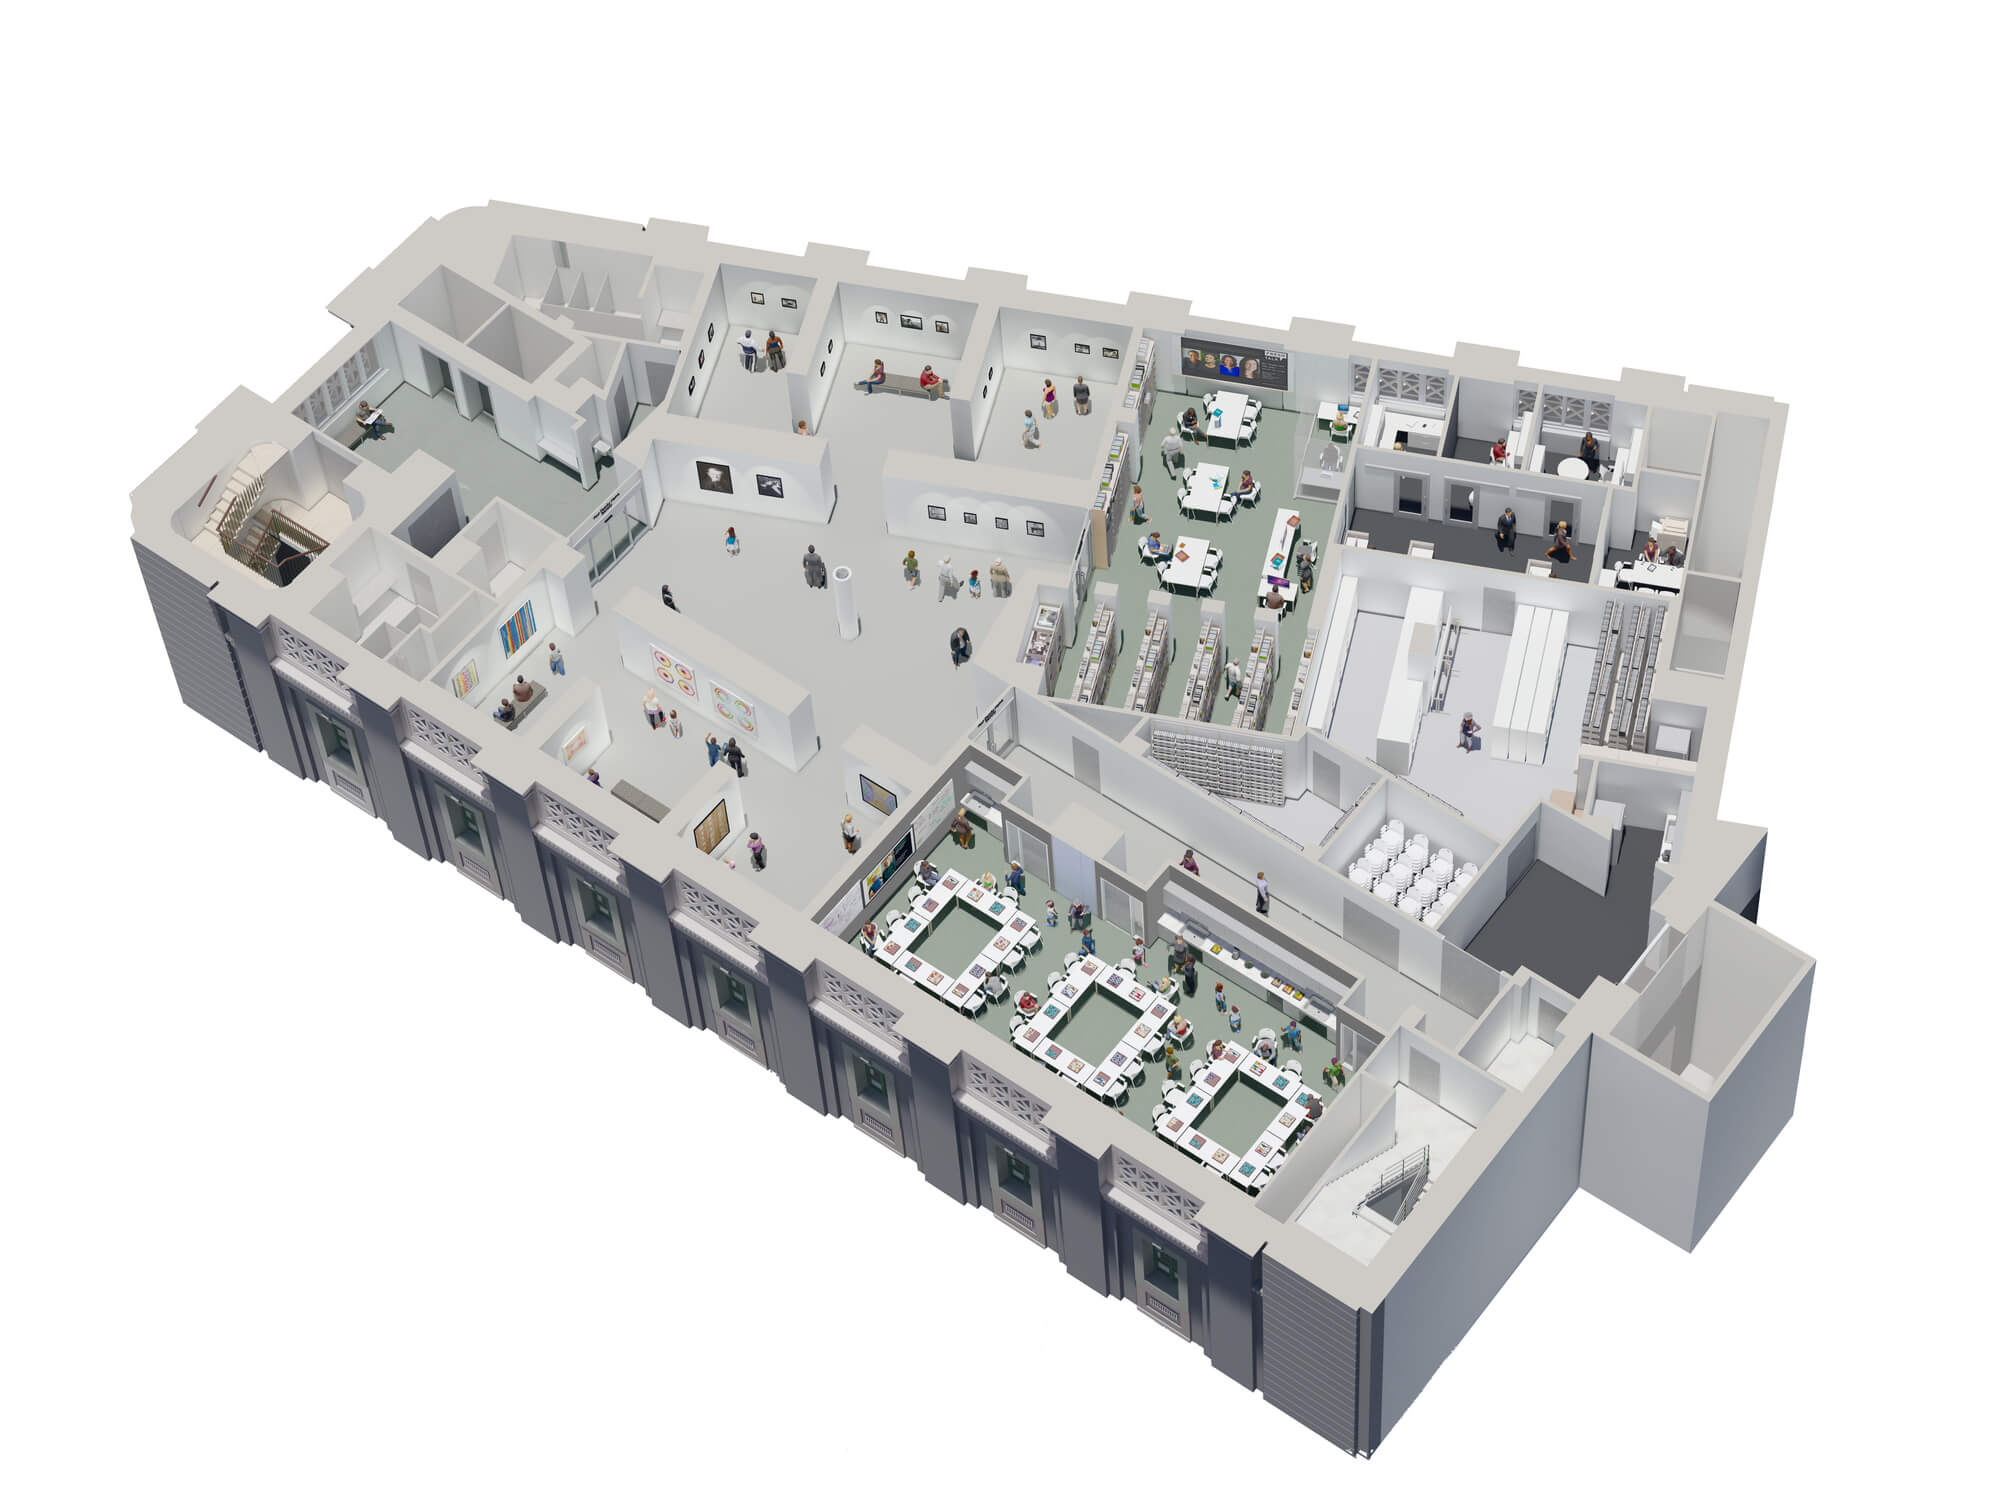 A digital rendering shows an overhead view of a cross-section of a building. Rooms are separated by walls and small, digitally rendered people walk through gallery spaces, sit at tables, or browse library stacks. Mechanical systems, storage areas, and stairwells are also visible, giving a comprehensive look at one floor of the building.